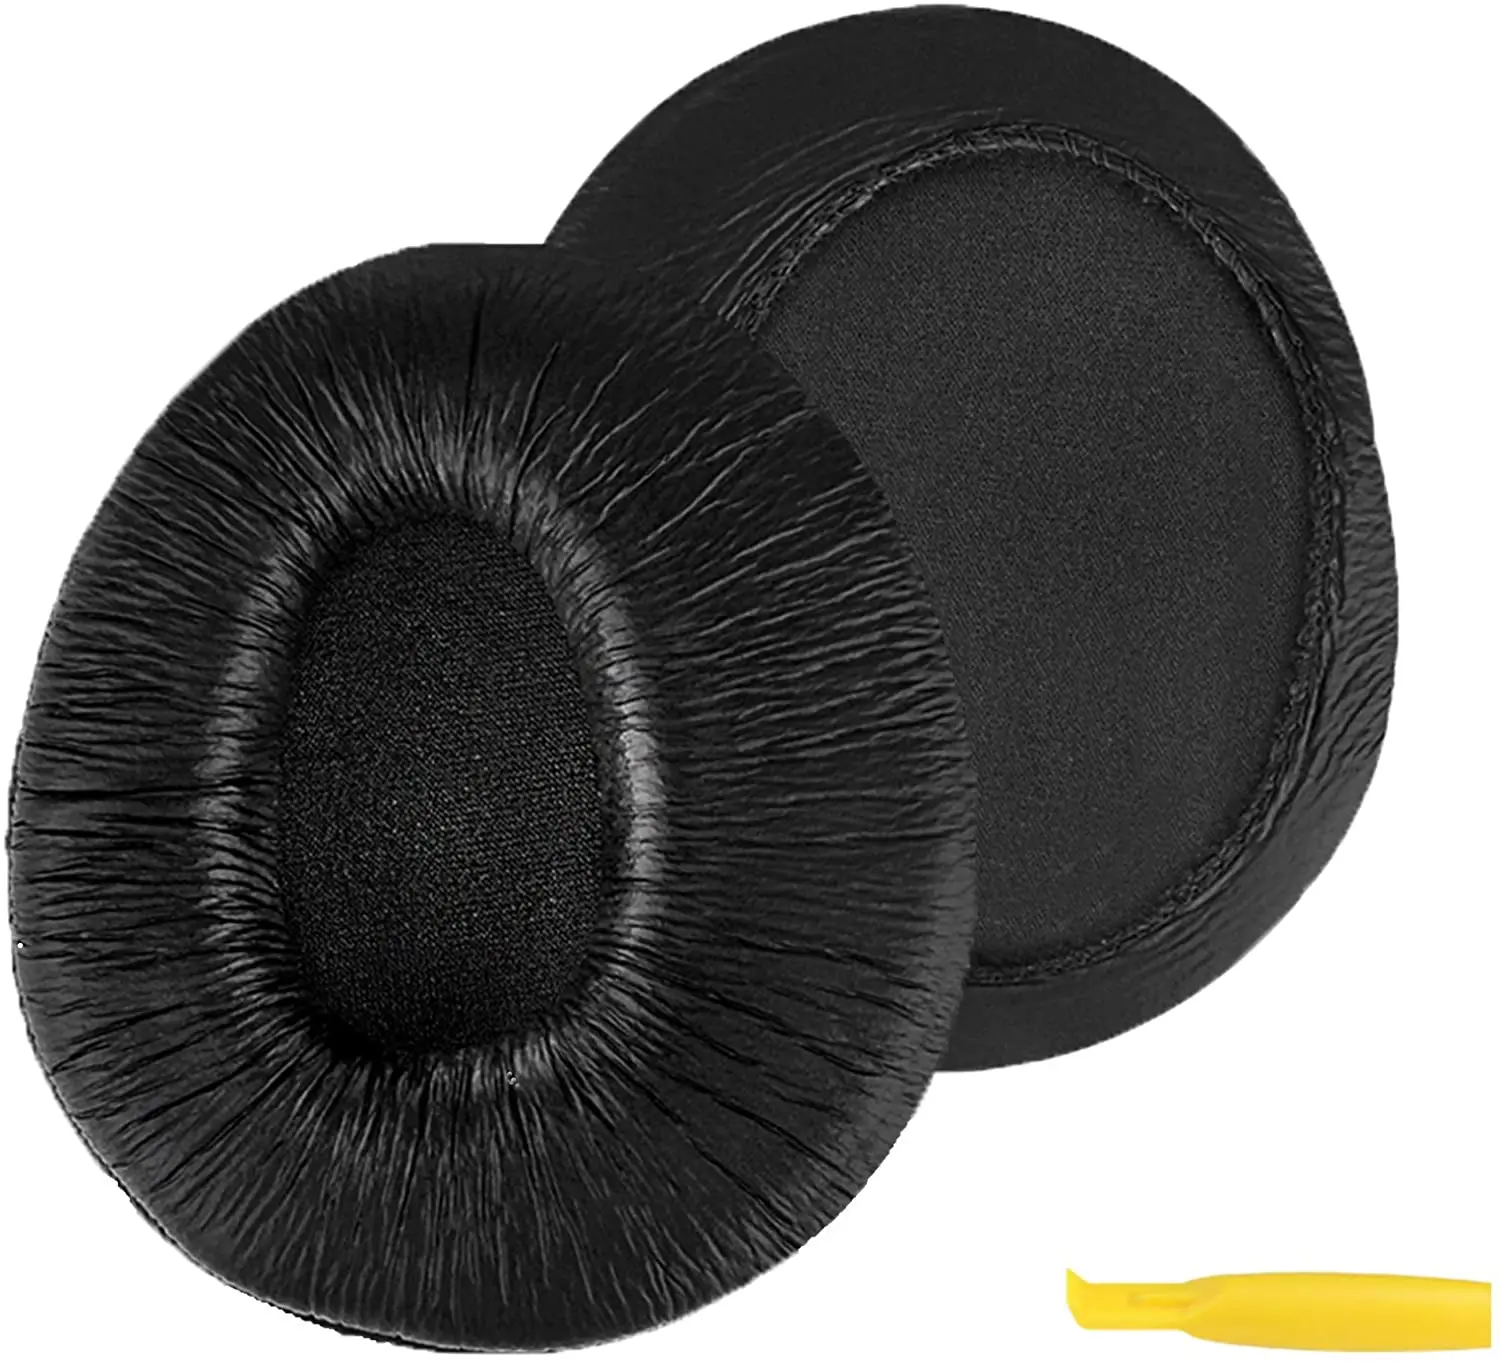 

QuickFit Protein Leather Ear Pads for Sony MDR-Z600, Z900, V600, V900, V900HD, 7509, 7509HD Headphones Earpads, Headset Ear Cush